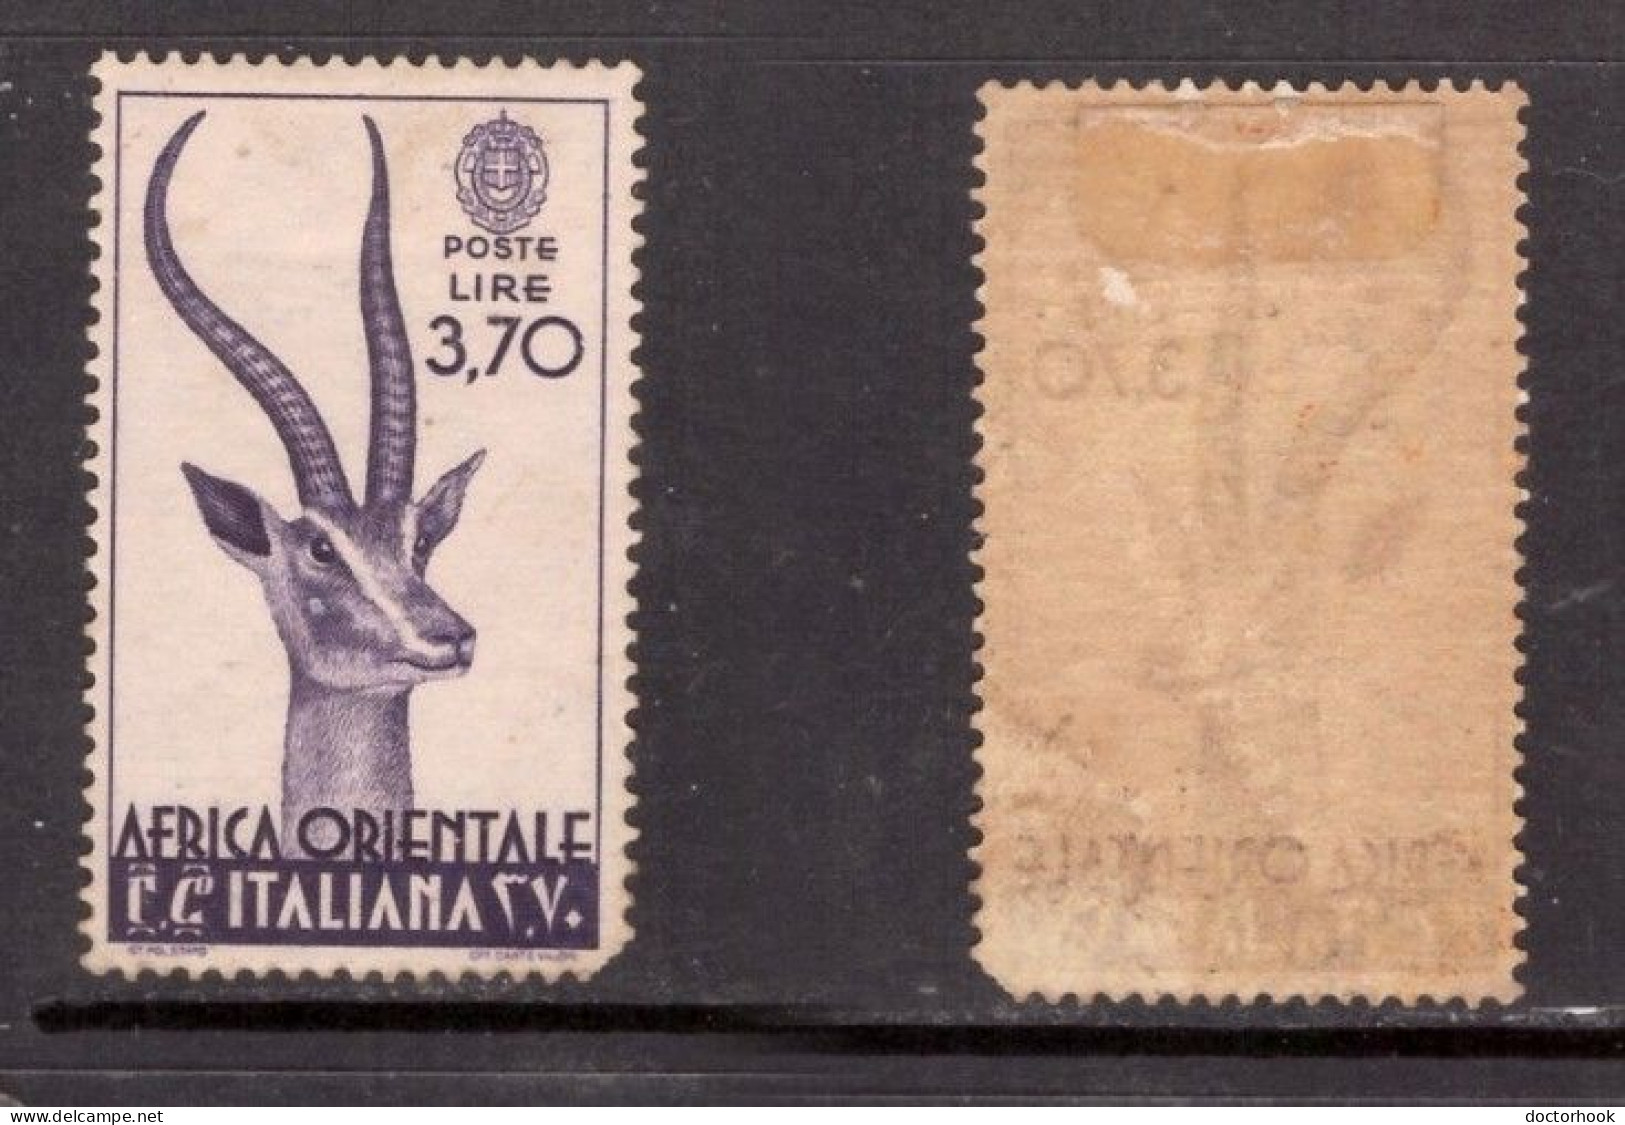 ITALIAN EAST AFRICA   Scott # 17* MINT HINGED (CONDITION AS PER SCAN) (Stamp Scan # 957-1) - Africa Oriental